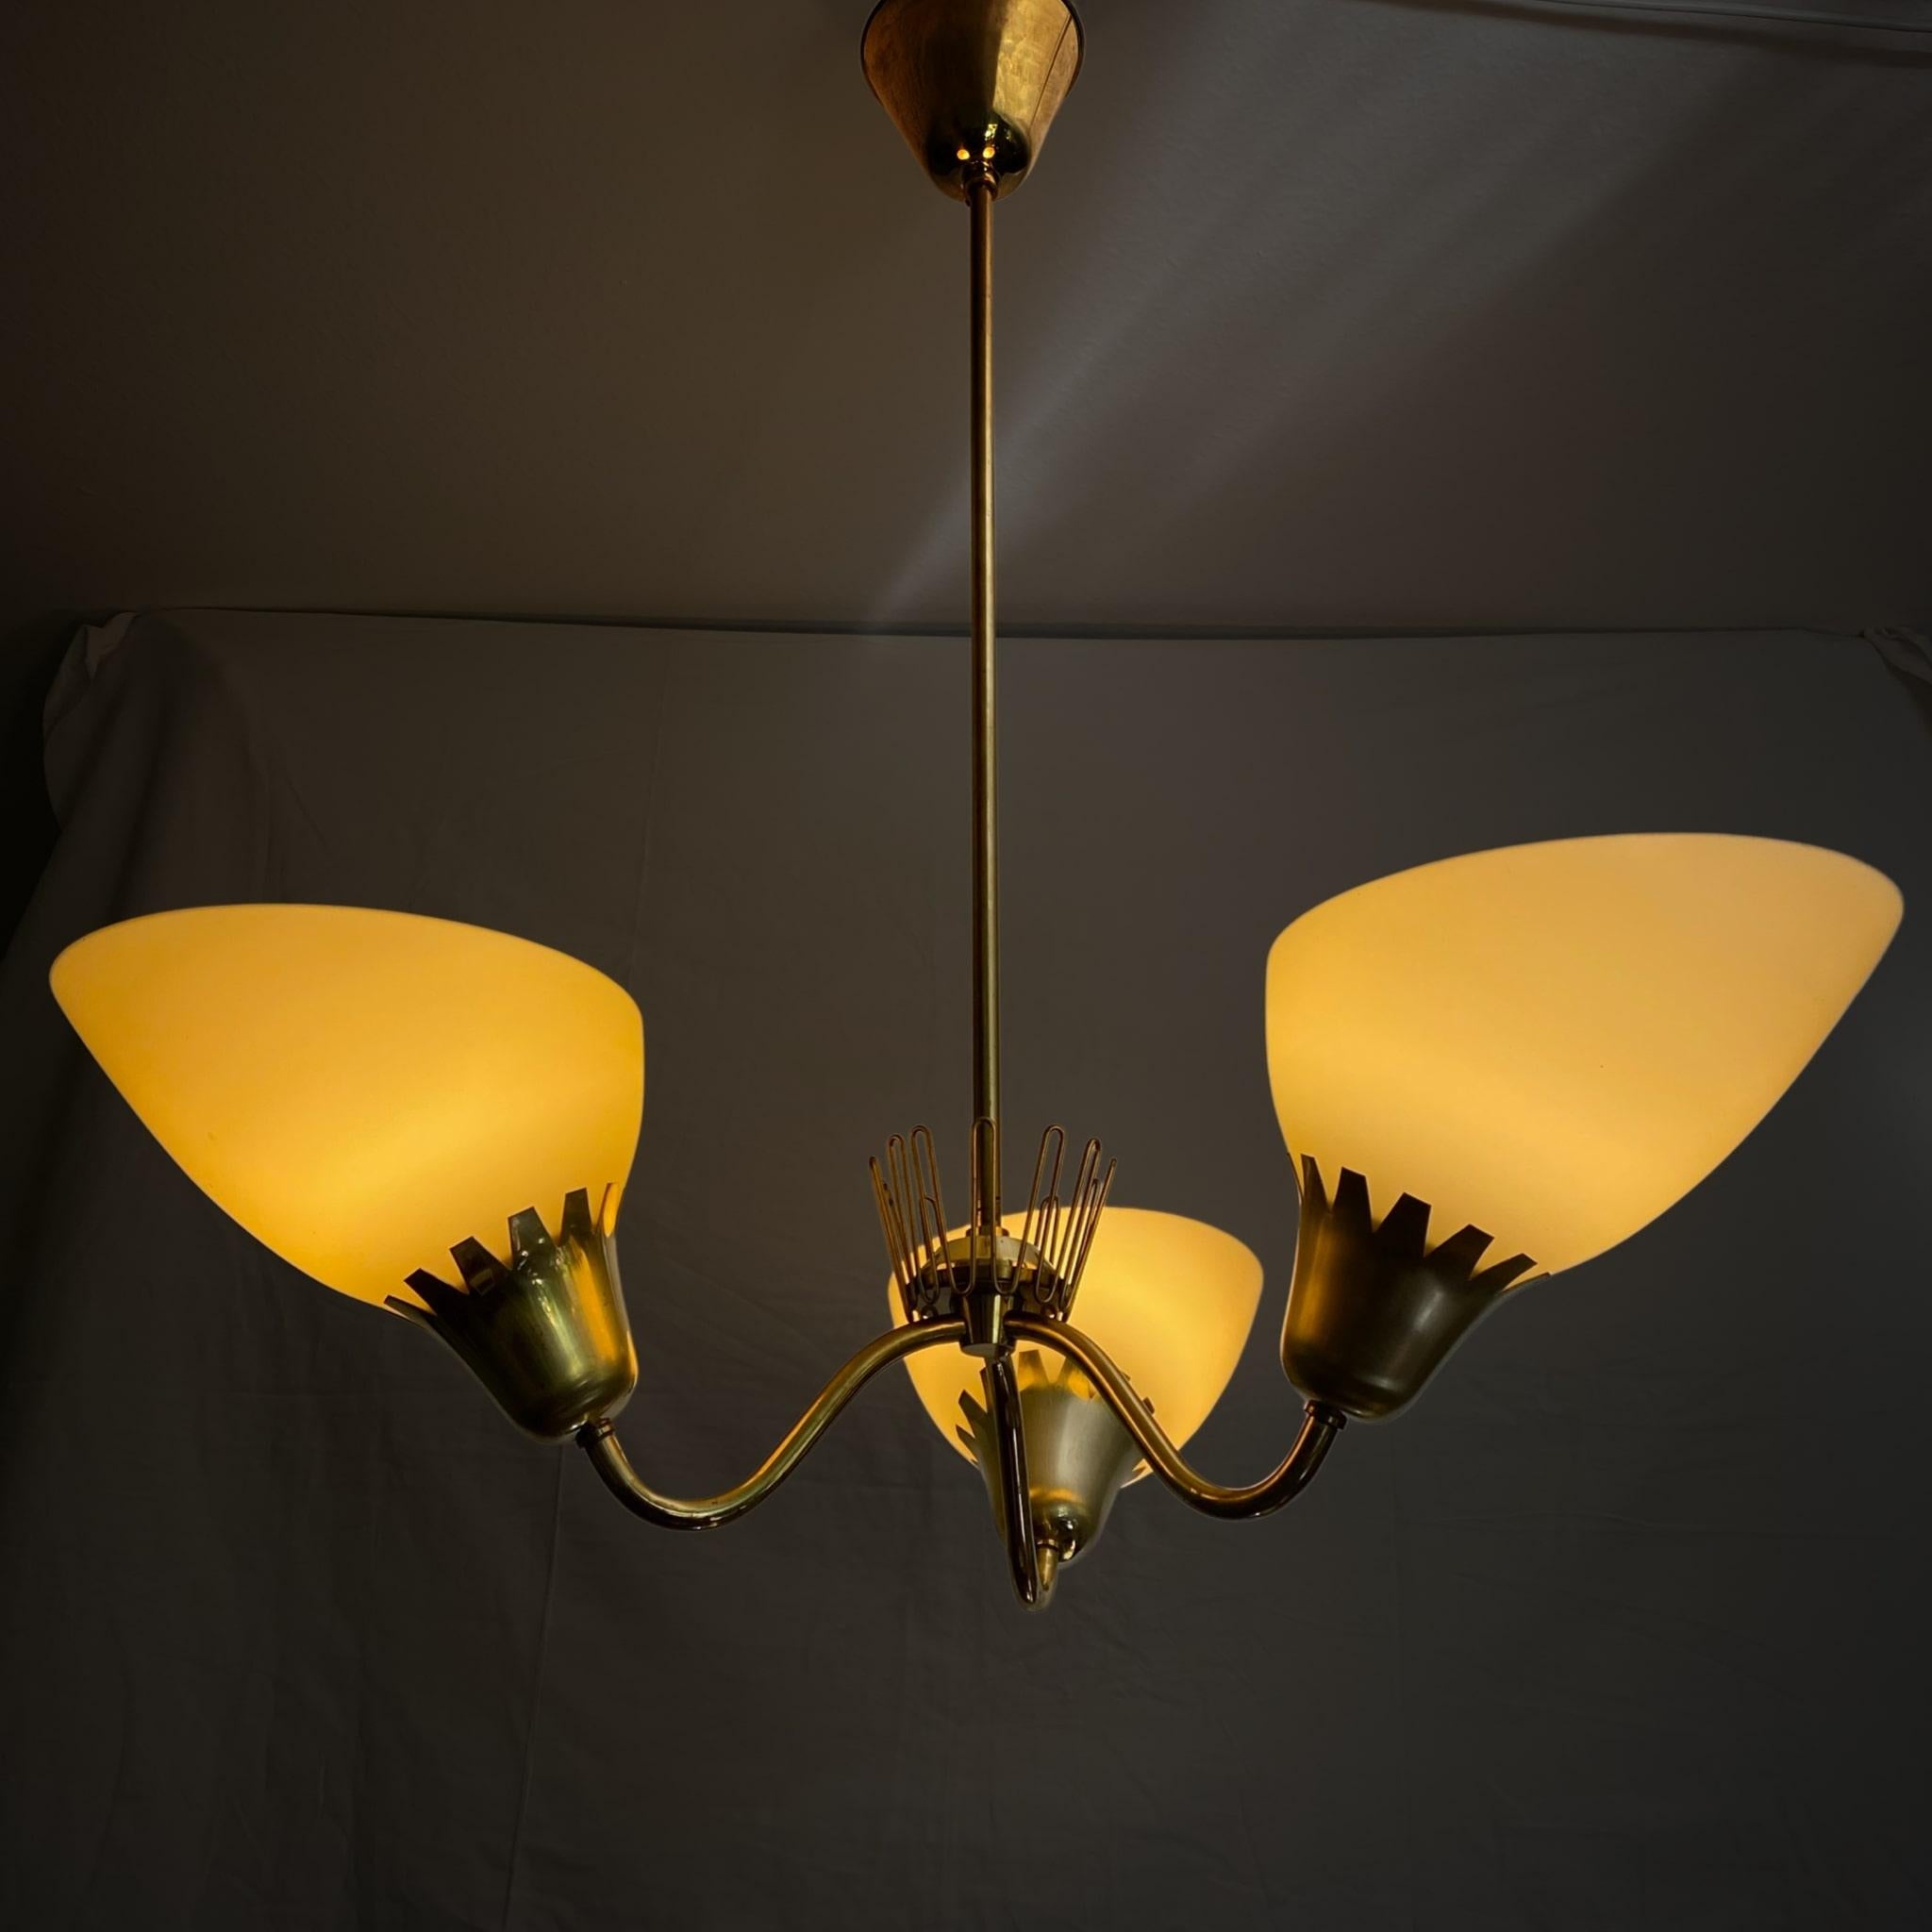 Swedish mid century chandelier model A4350 produced by the Swedish electric company ASEA in the 1950s. Sculptural frame made from brass with three arms holding amber colored glass shades. Decorative wave shaped ornament in the center of the fixture